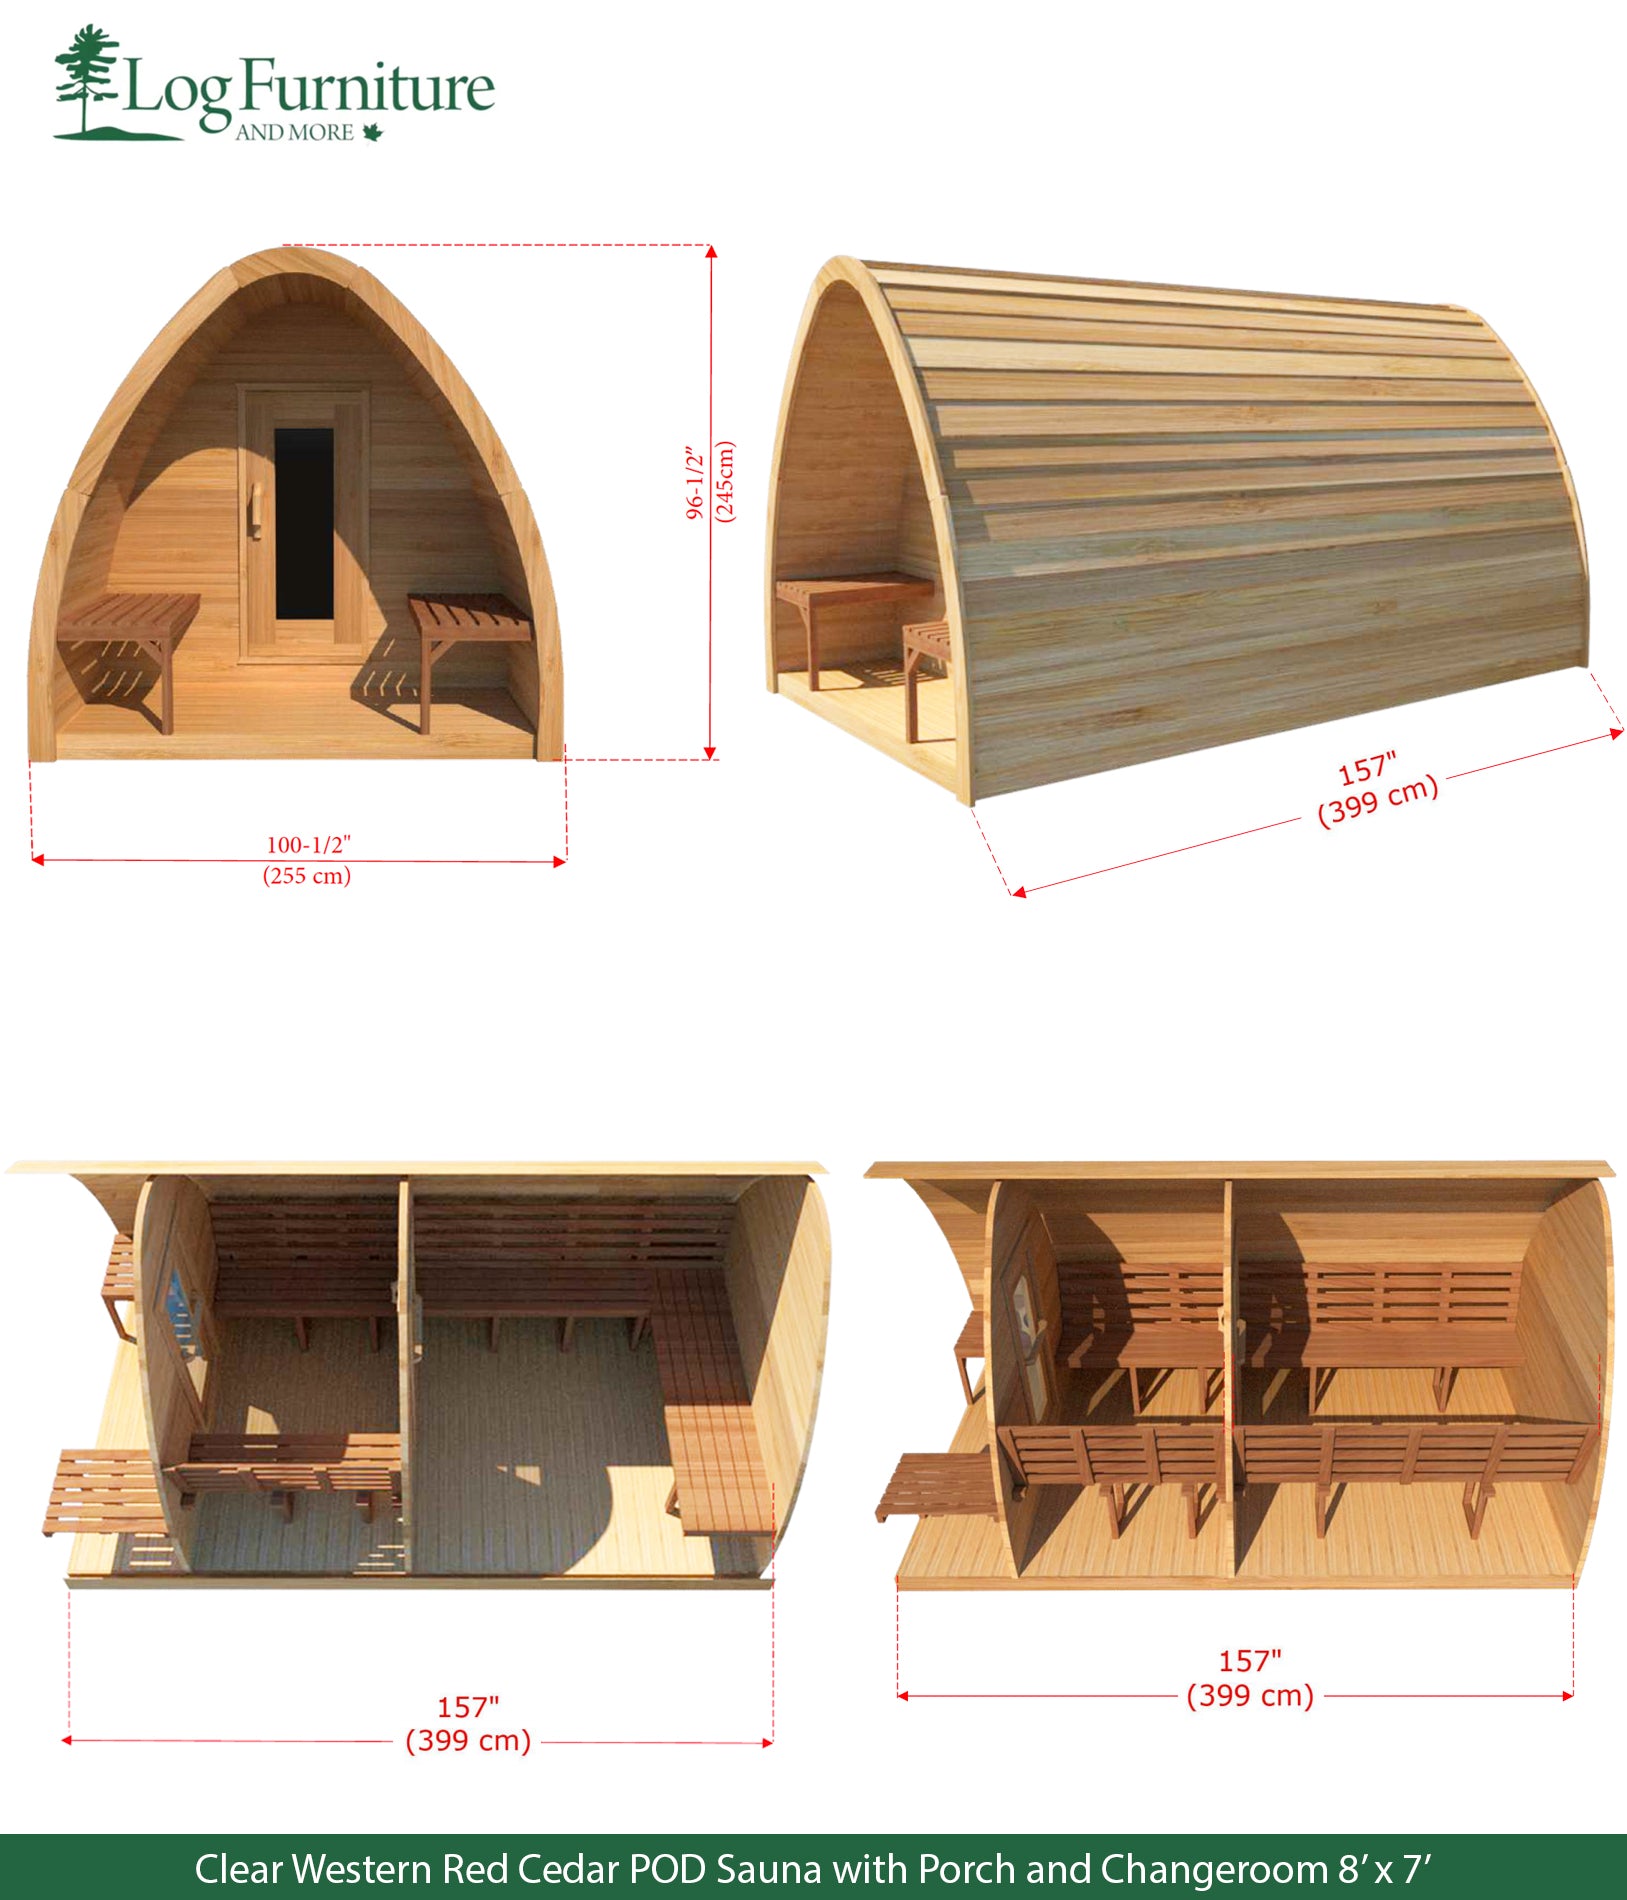 Clear Western Red Cedar POD Sauna with Porch and Changeroom 8' x 7'